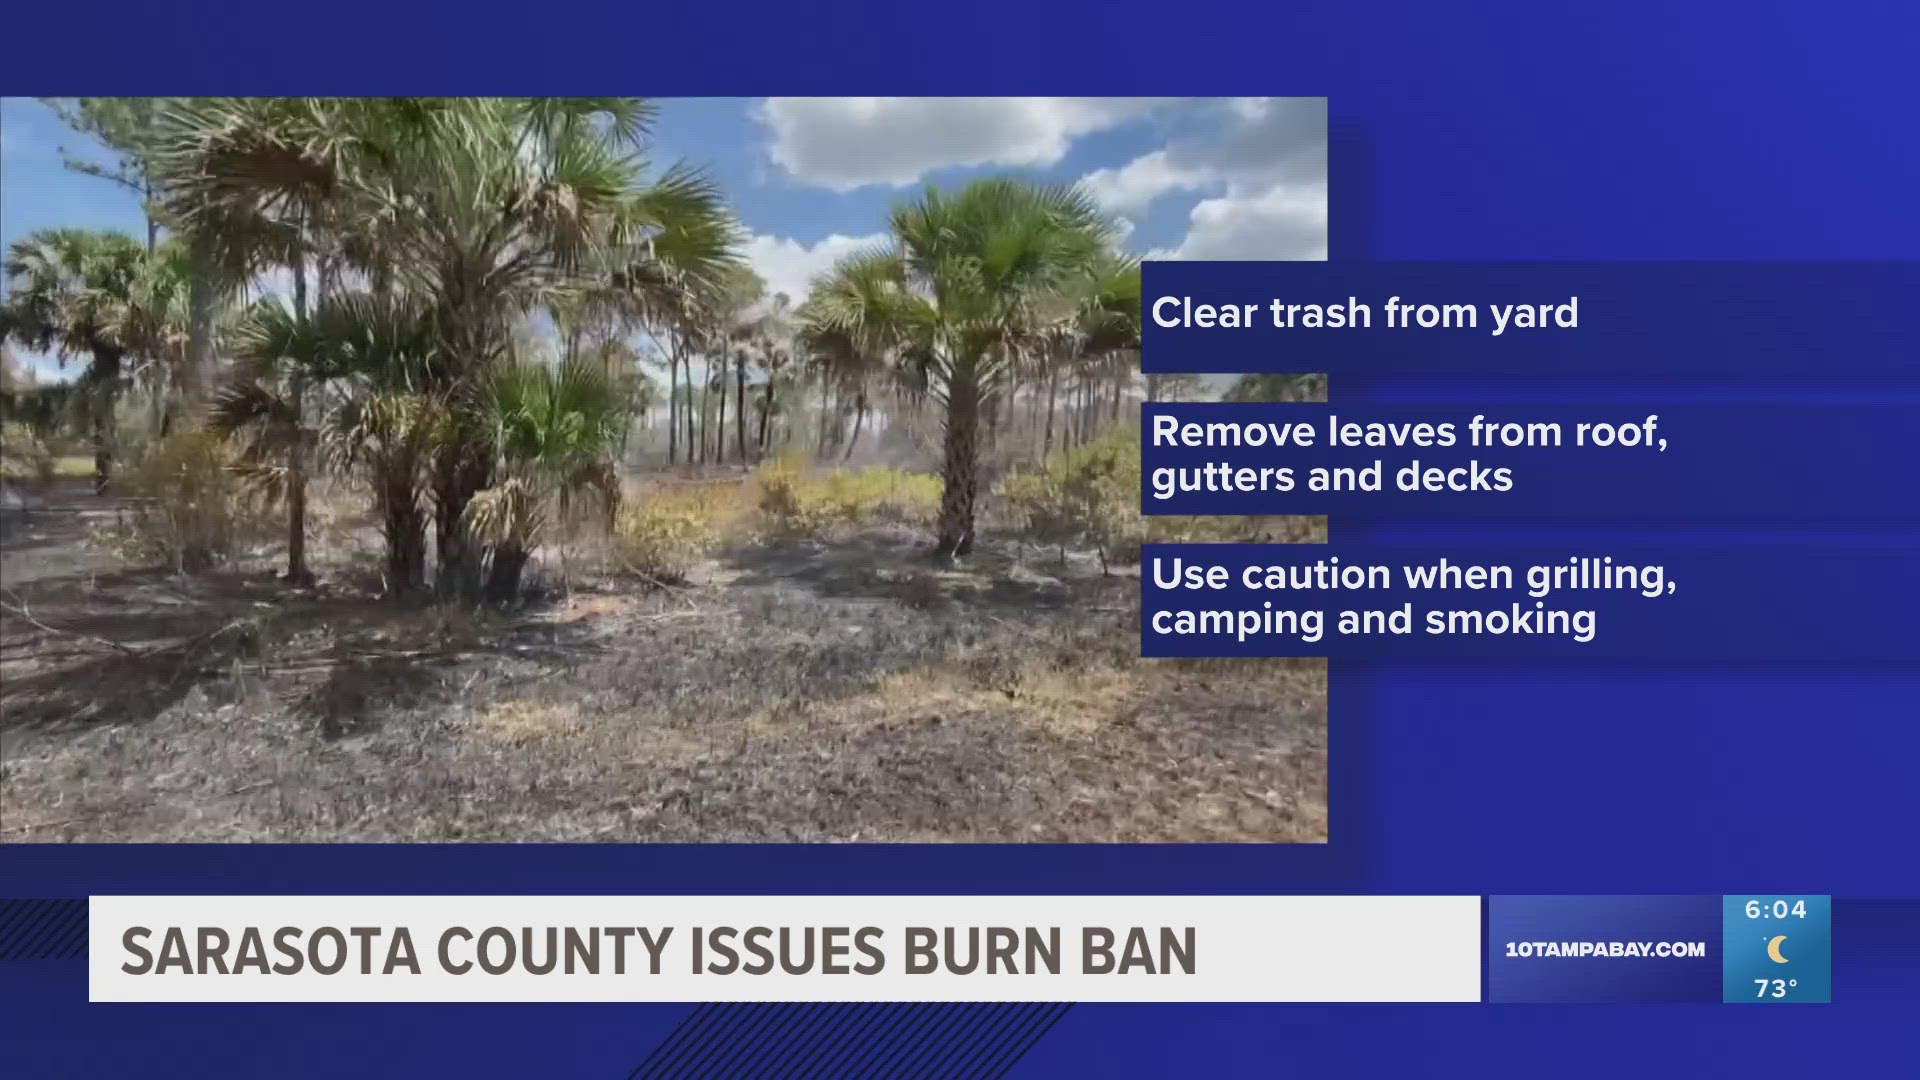 County leaders say you can clear trash and dead vegetation from your yard, remove leaves and debris and use caution when grilling to prevent a fire from happening.